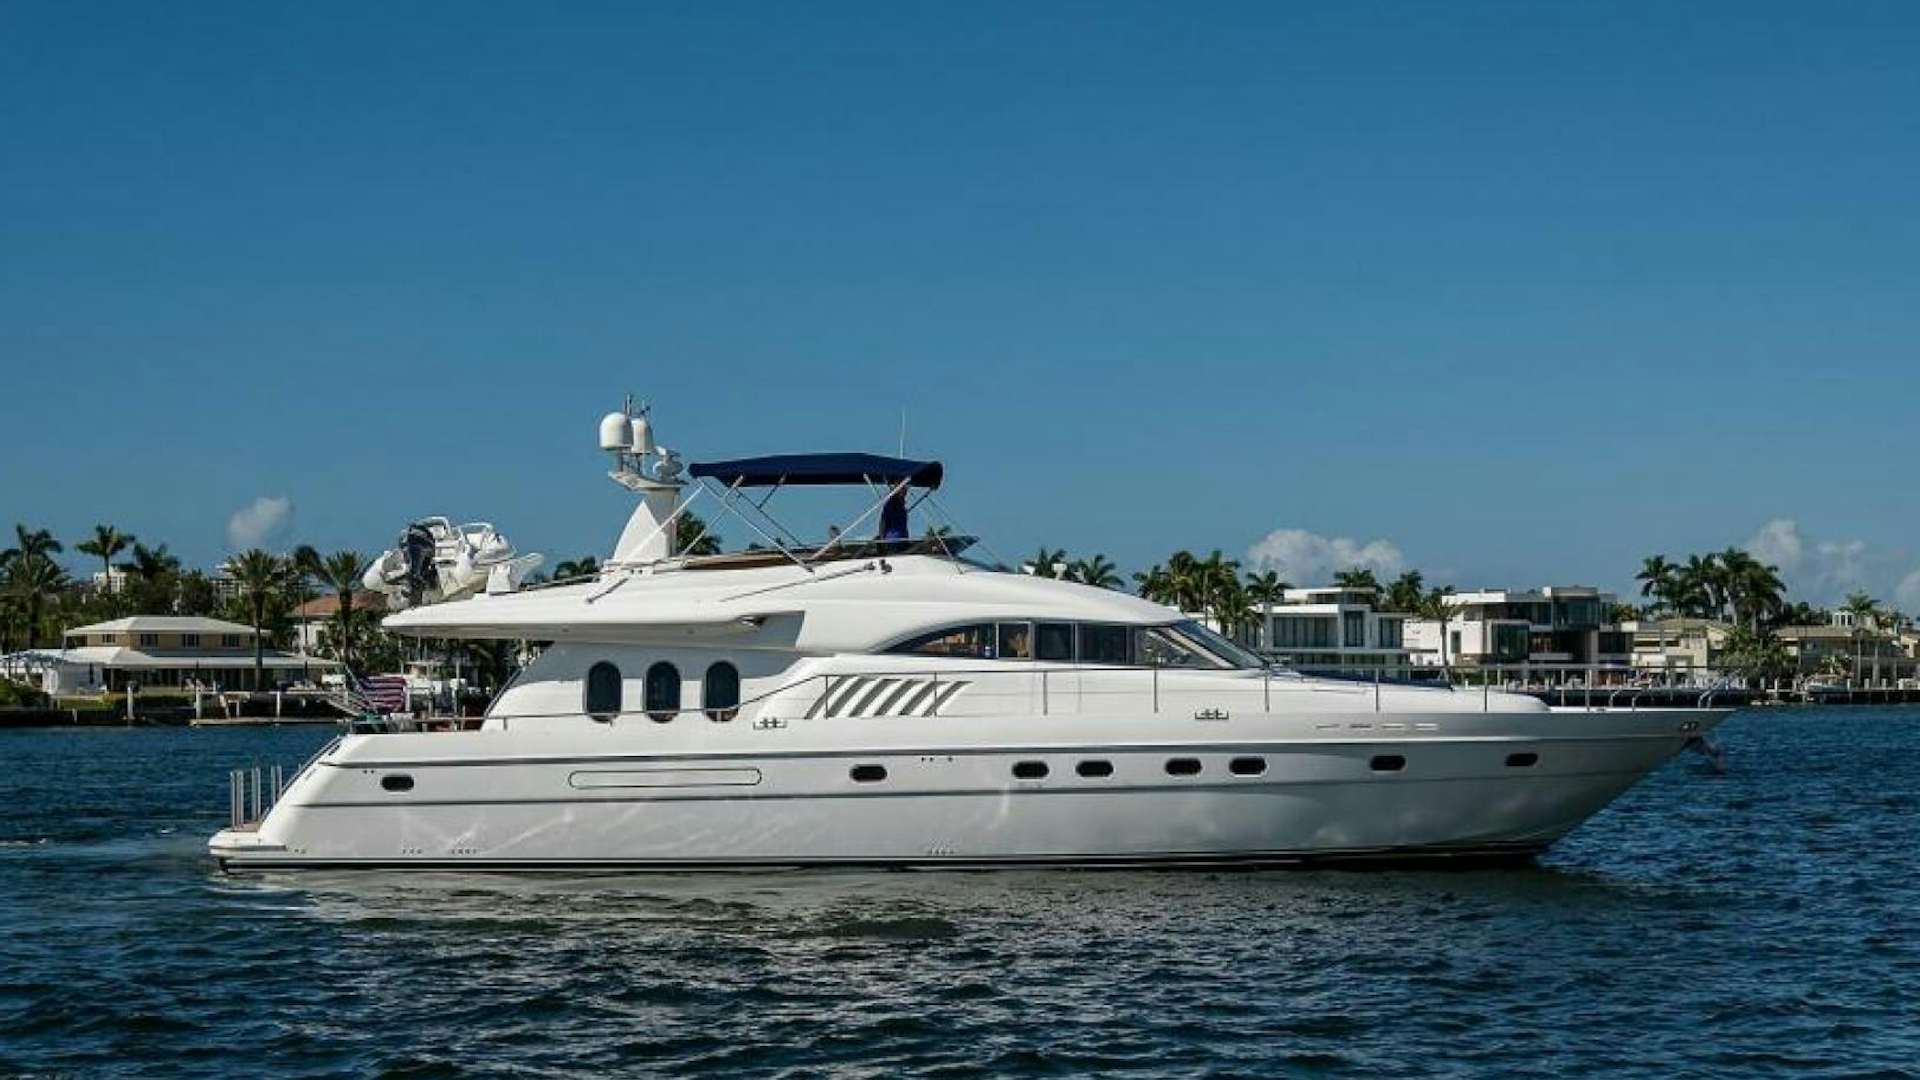 Watch Video for OCTOBER PRINCESS Yacht for Sale